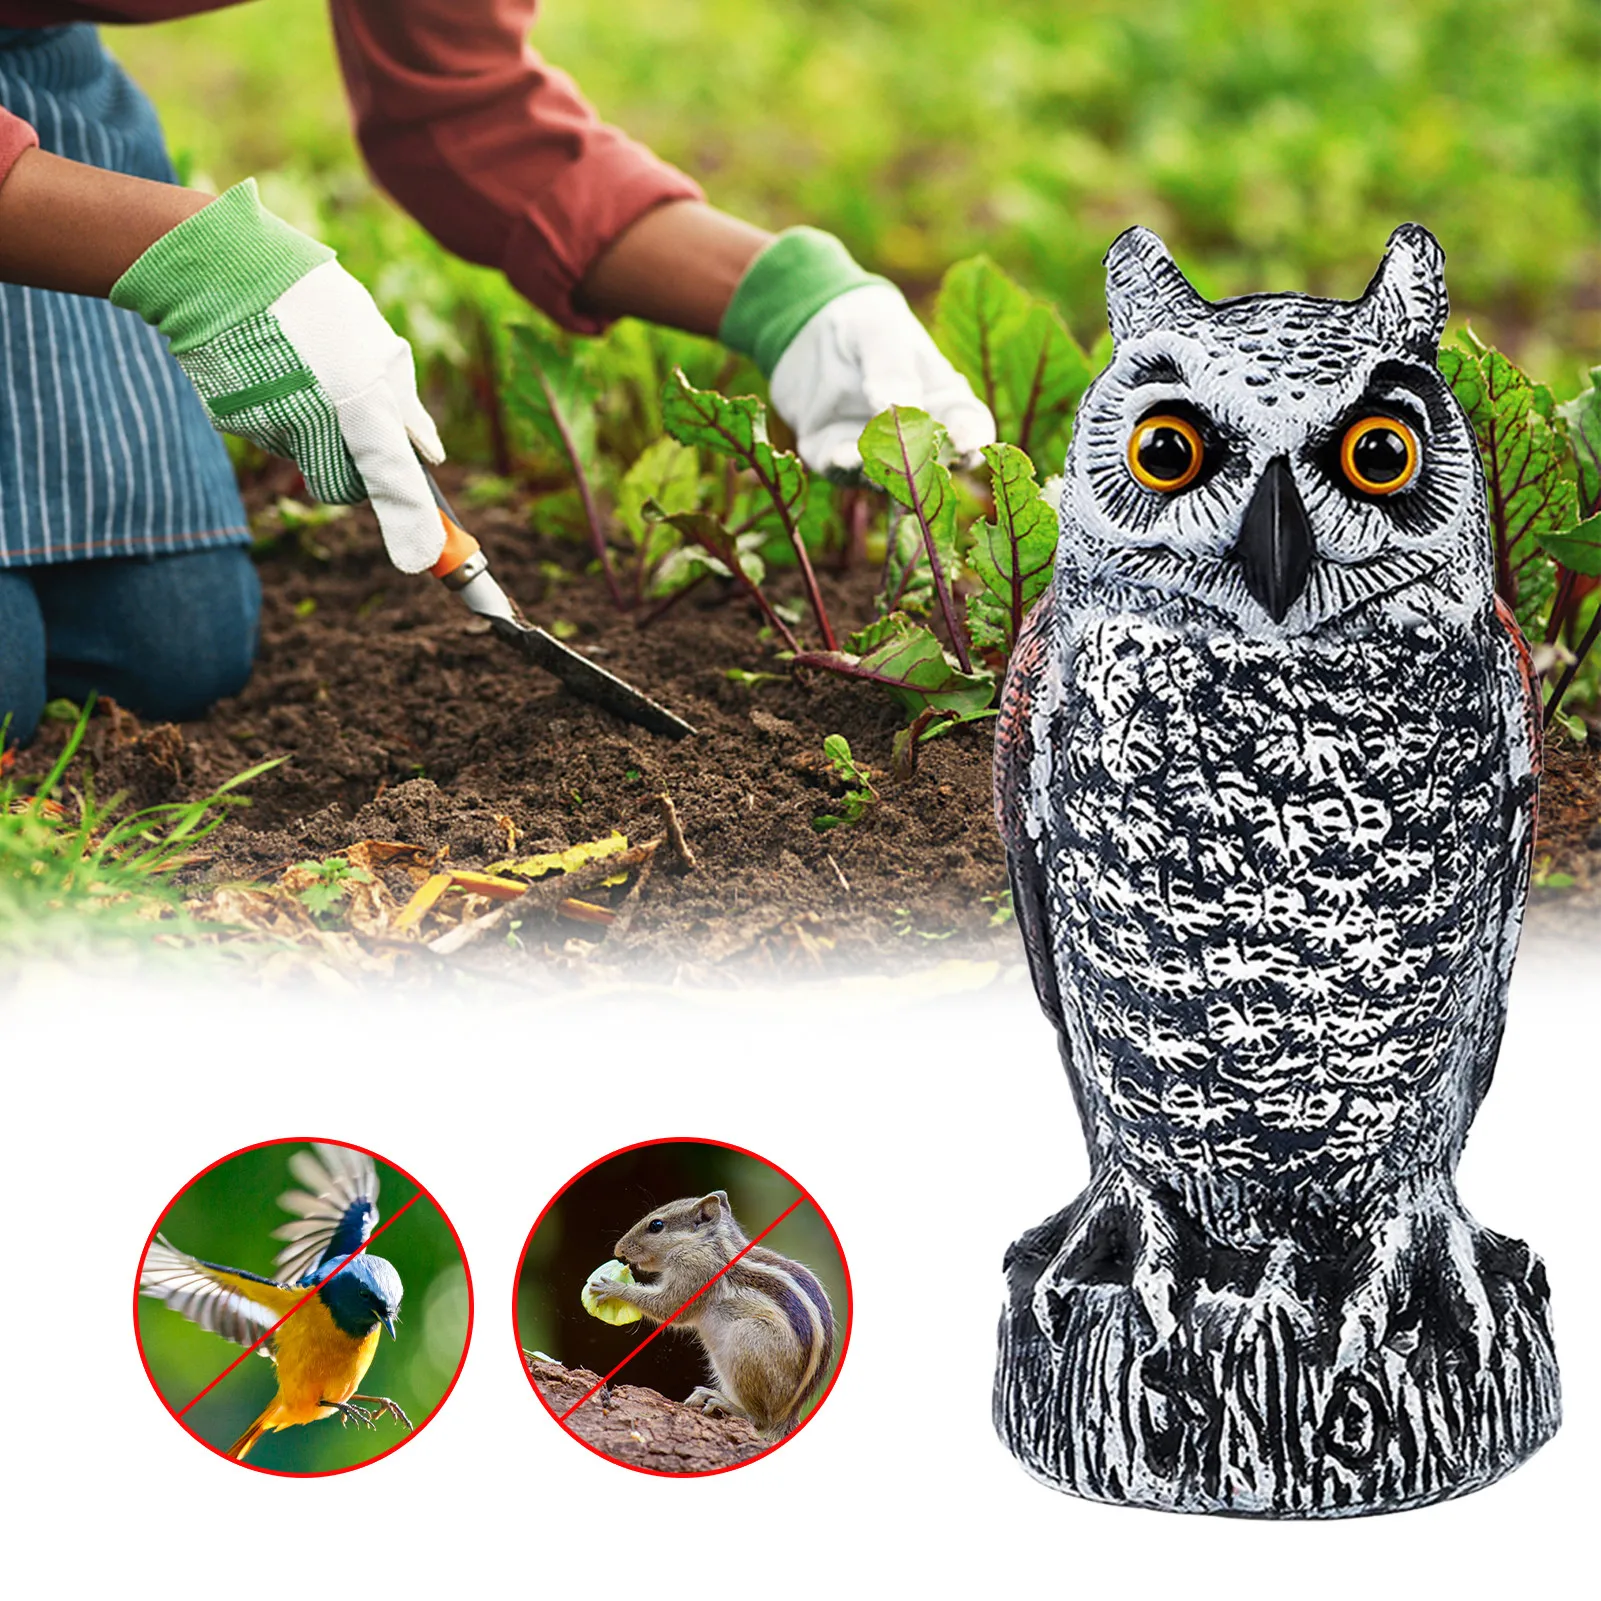 

Fake Owl Decoys to Scare Birds Away Natural Enemy Bird Deterrents Owl Statues with Light and Sound for Yard Garden Patio Outdoor